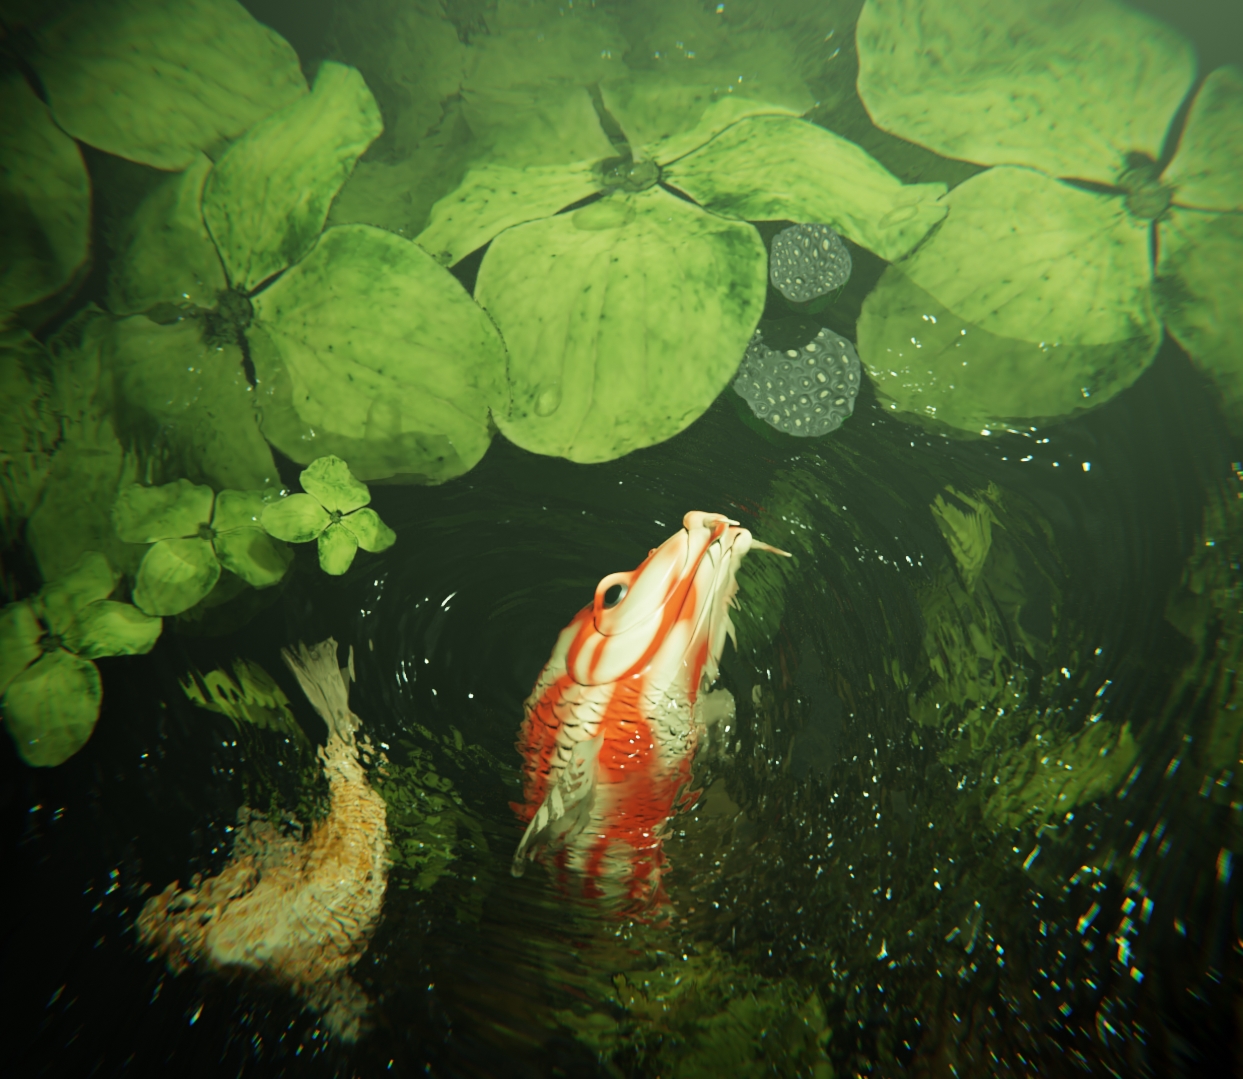 Fish pond - Finished Projects - Blender Artists Community